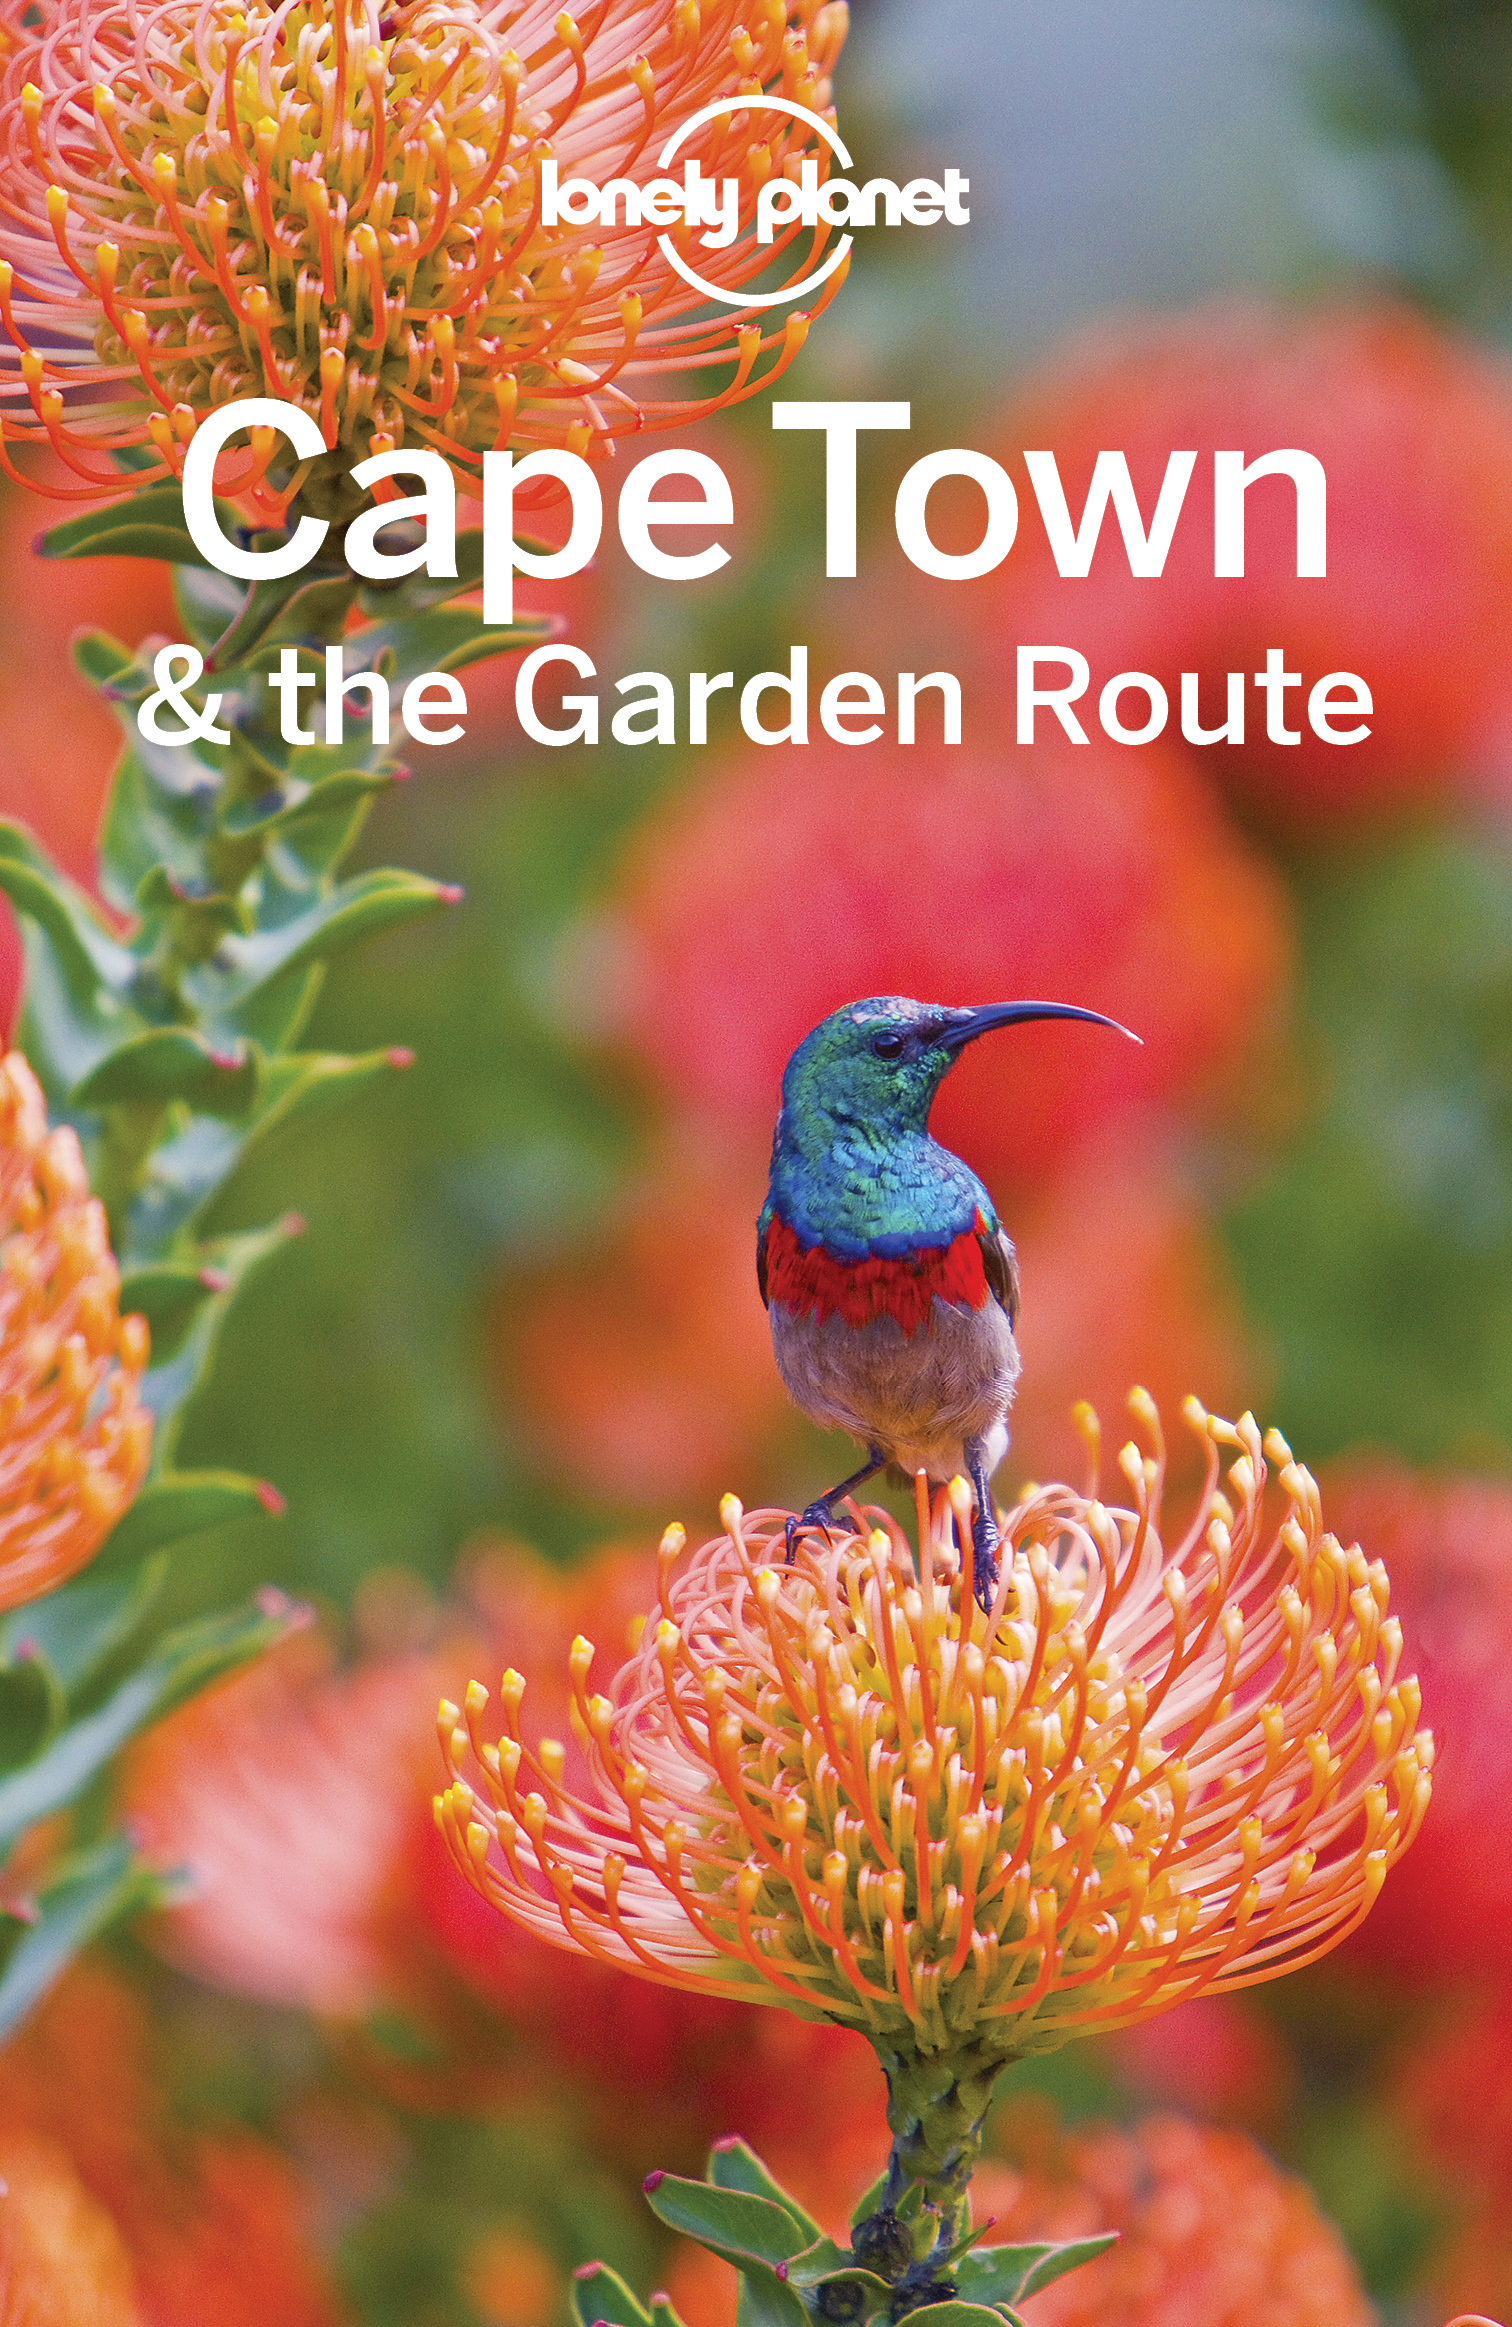 Lonely Planet Cape Town the Garden Route - image 1